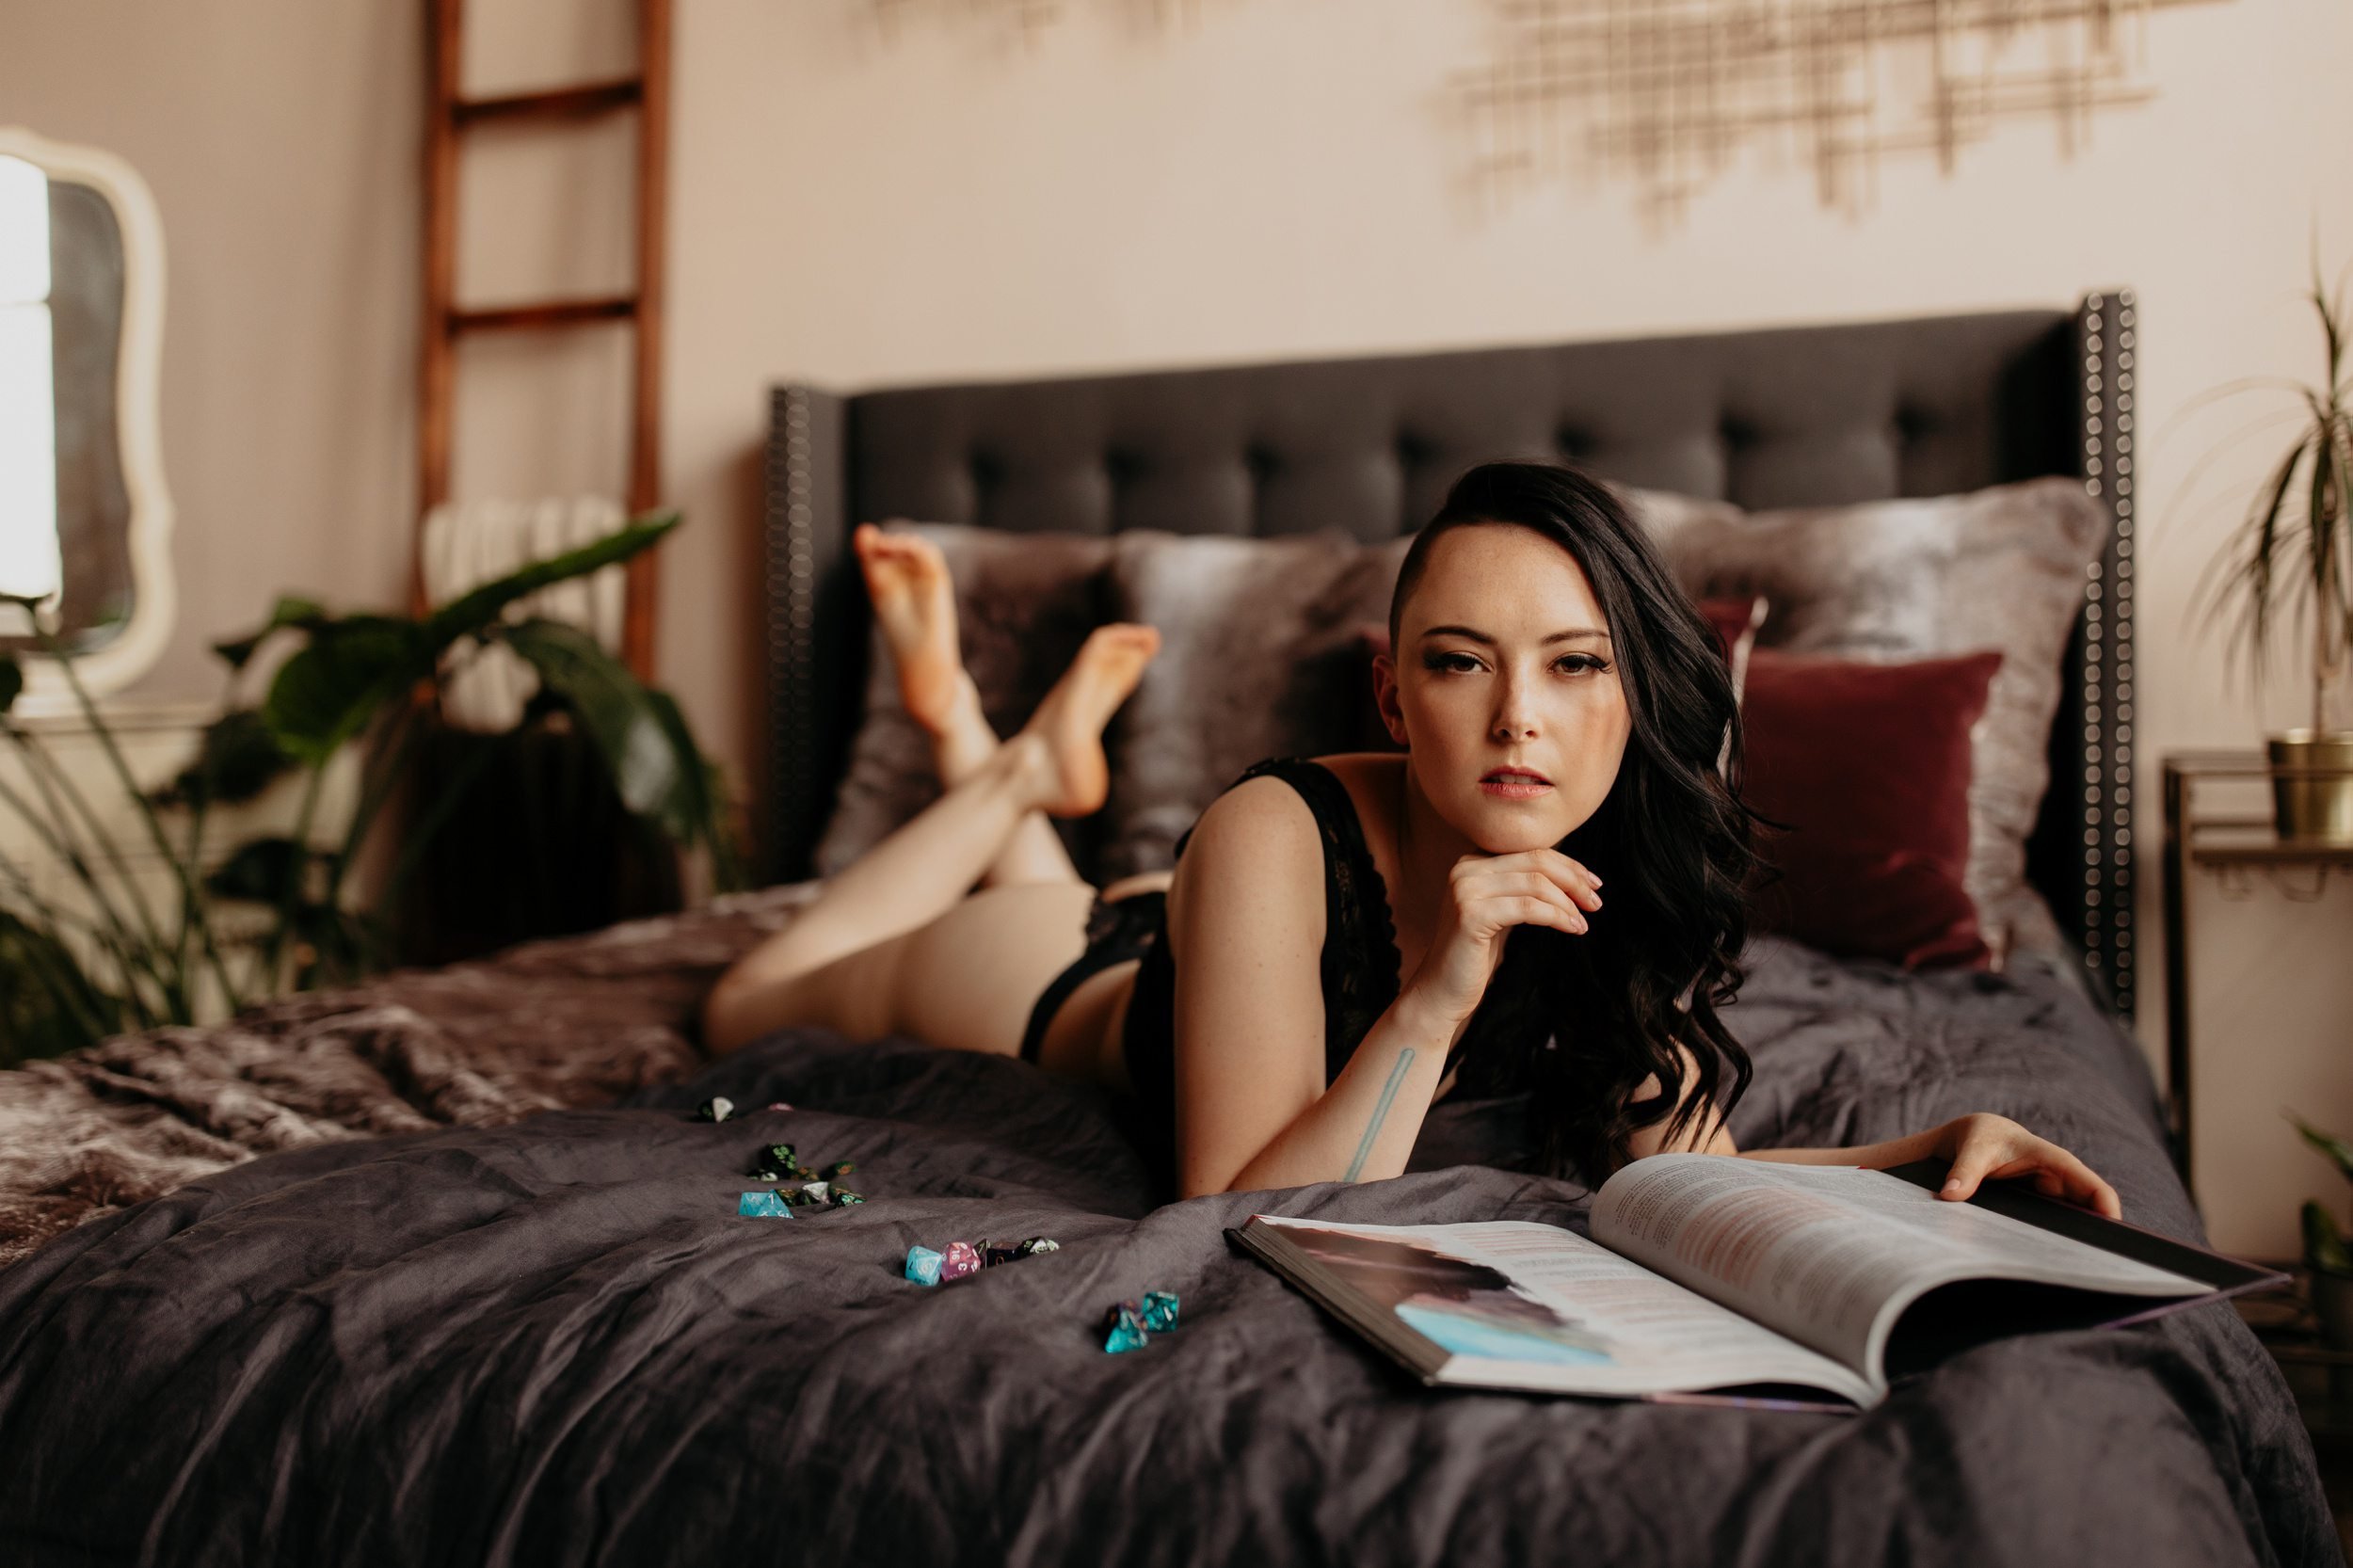 Boudoir-Style-Portraits-with-Dungeons-and-Dragons-Roleplaying-Props-0027.JPG